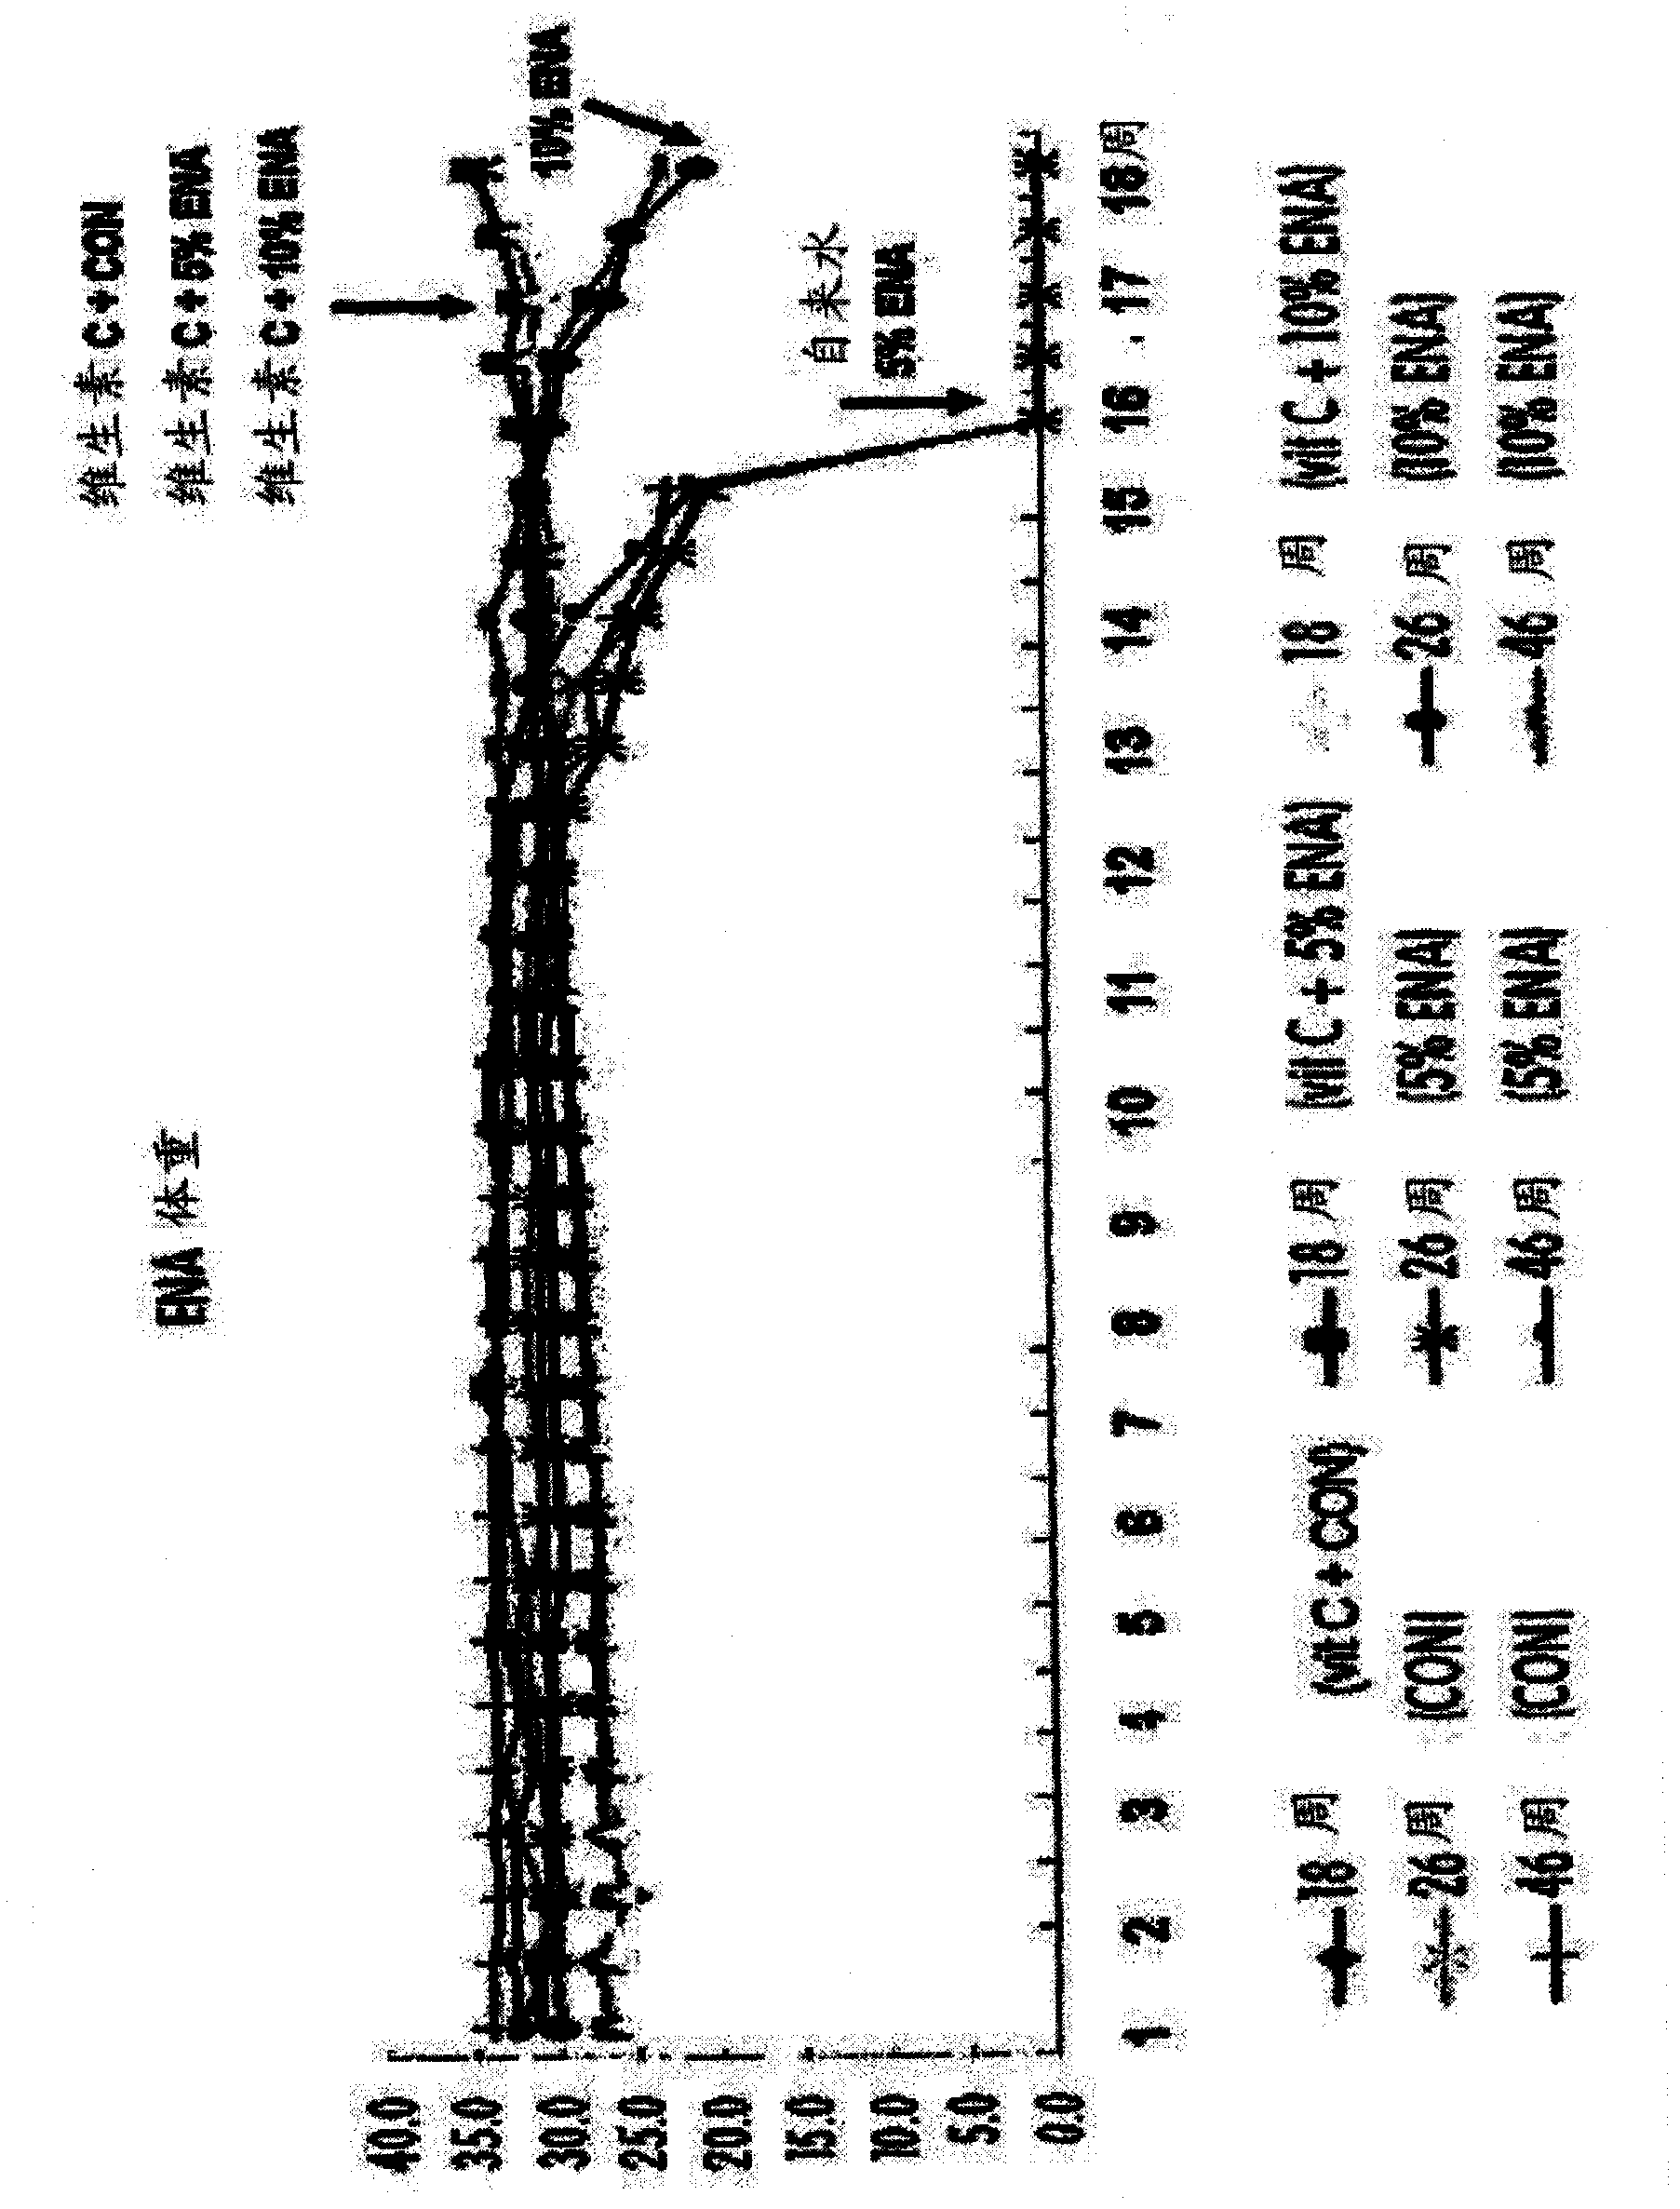 Pharmaceutical composition for preventing liver injury or improving liver function, containing the activated water of ENA actimineral resource A as an active ingredient